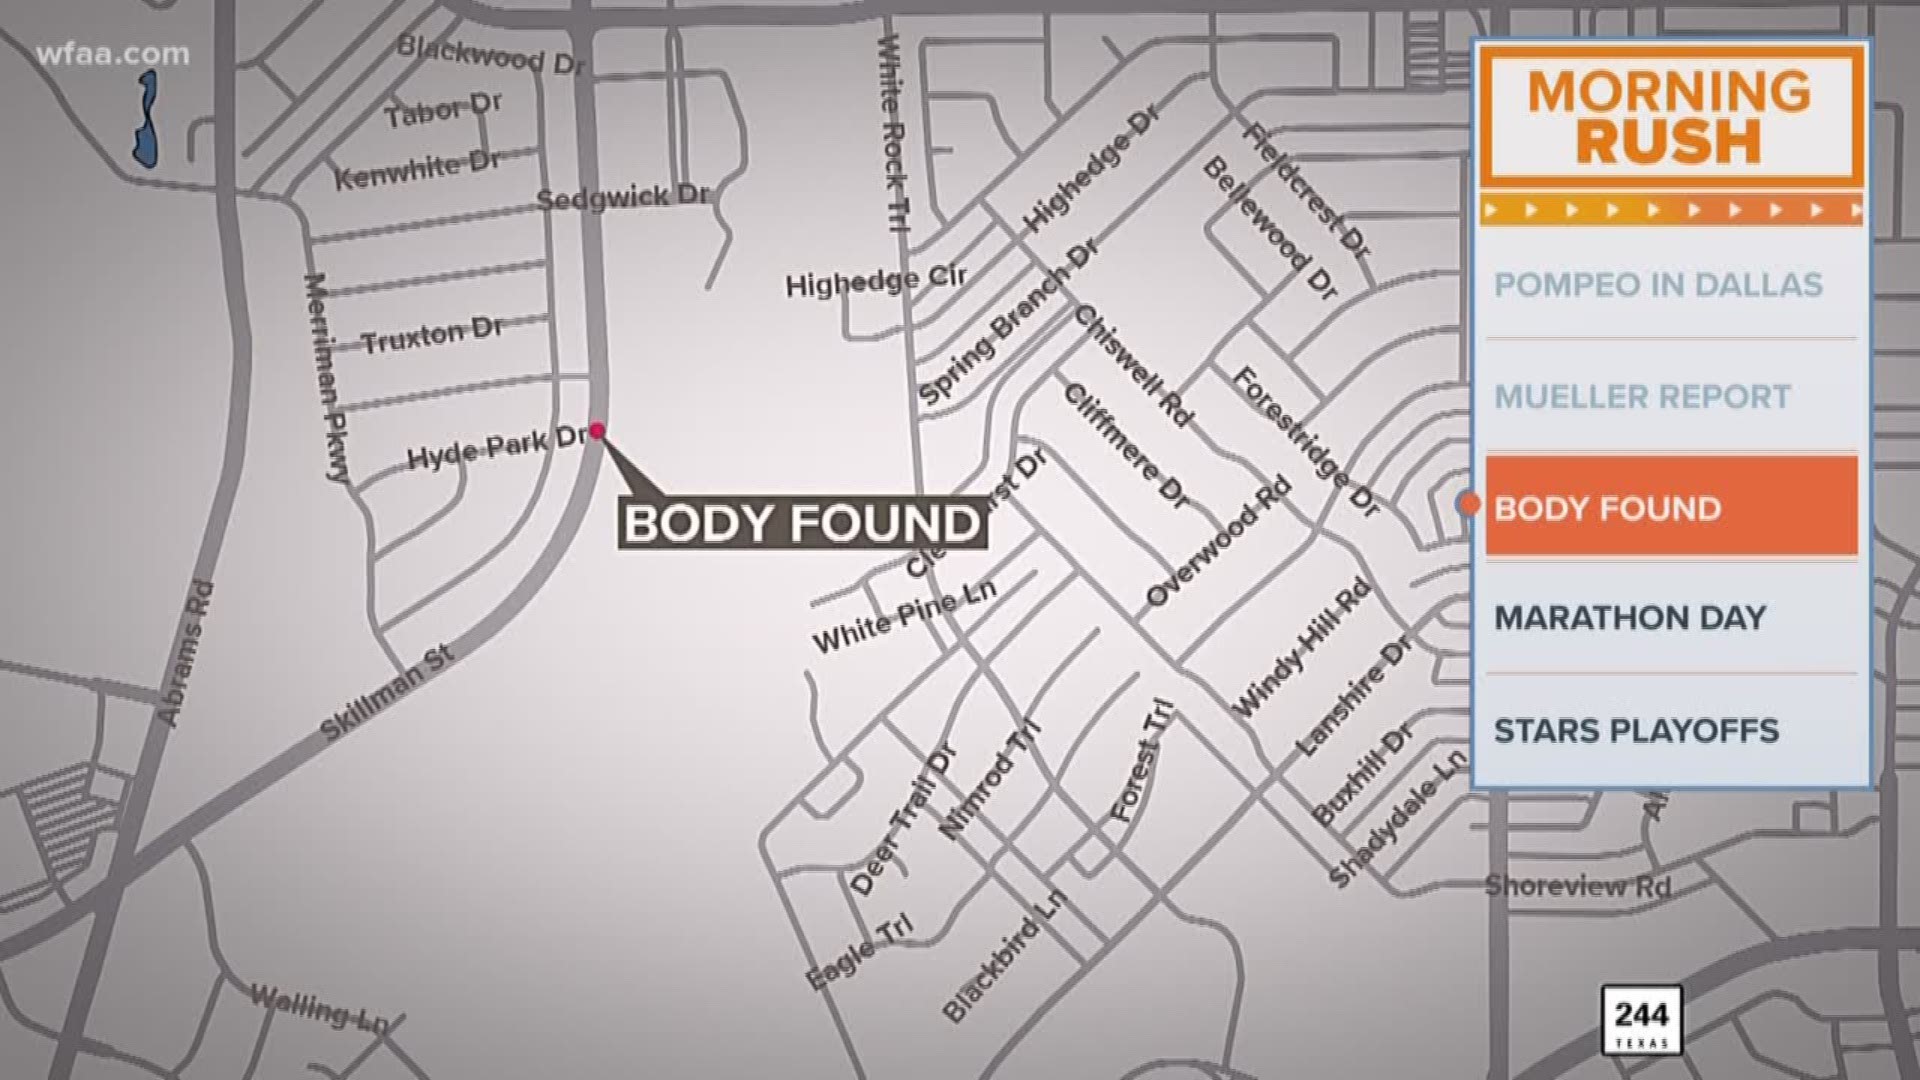 Body recovered in water in Lake Highlands